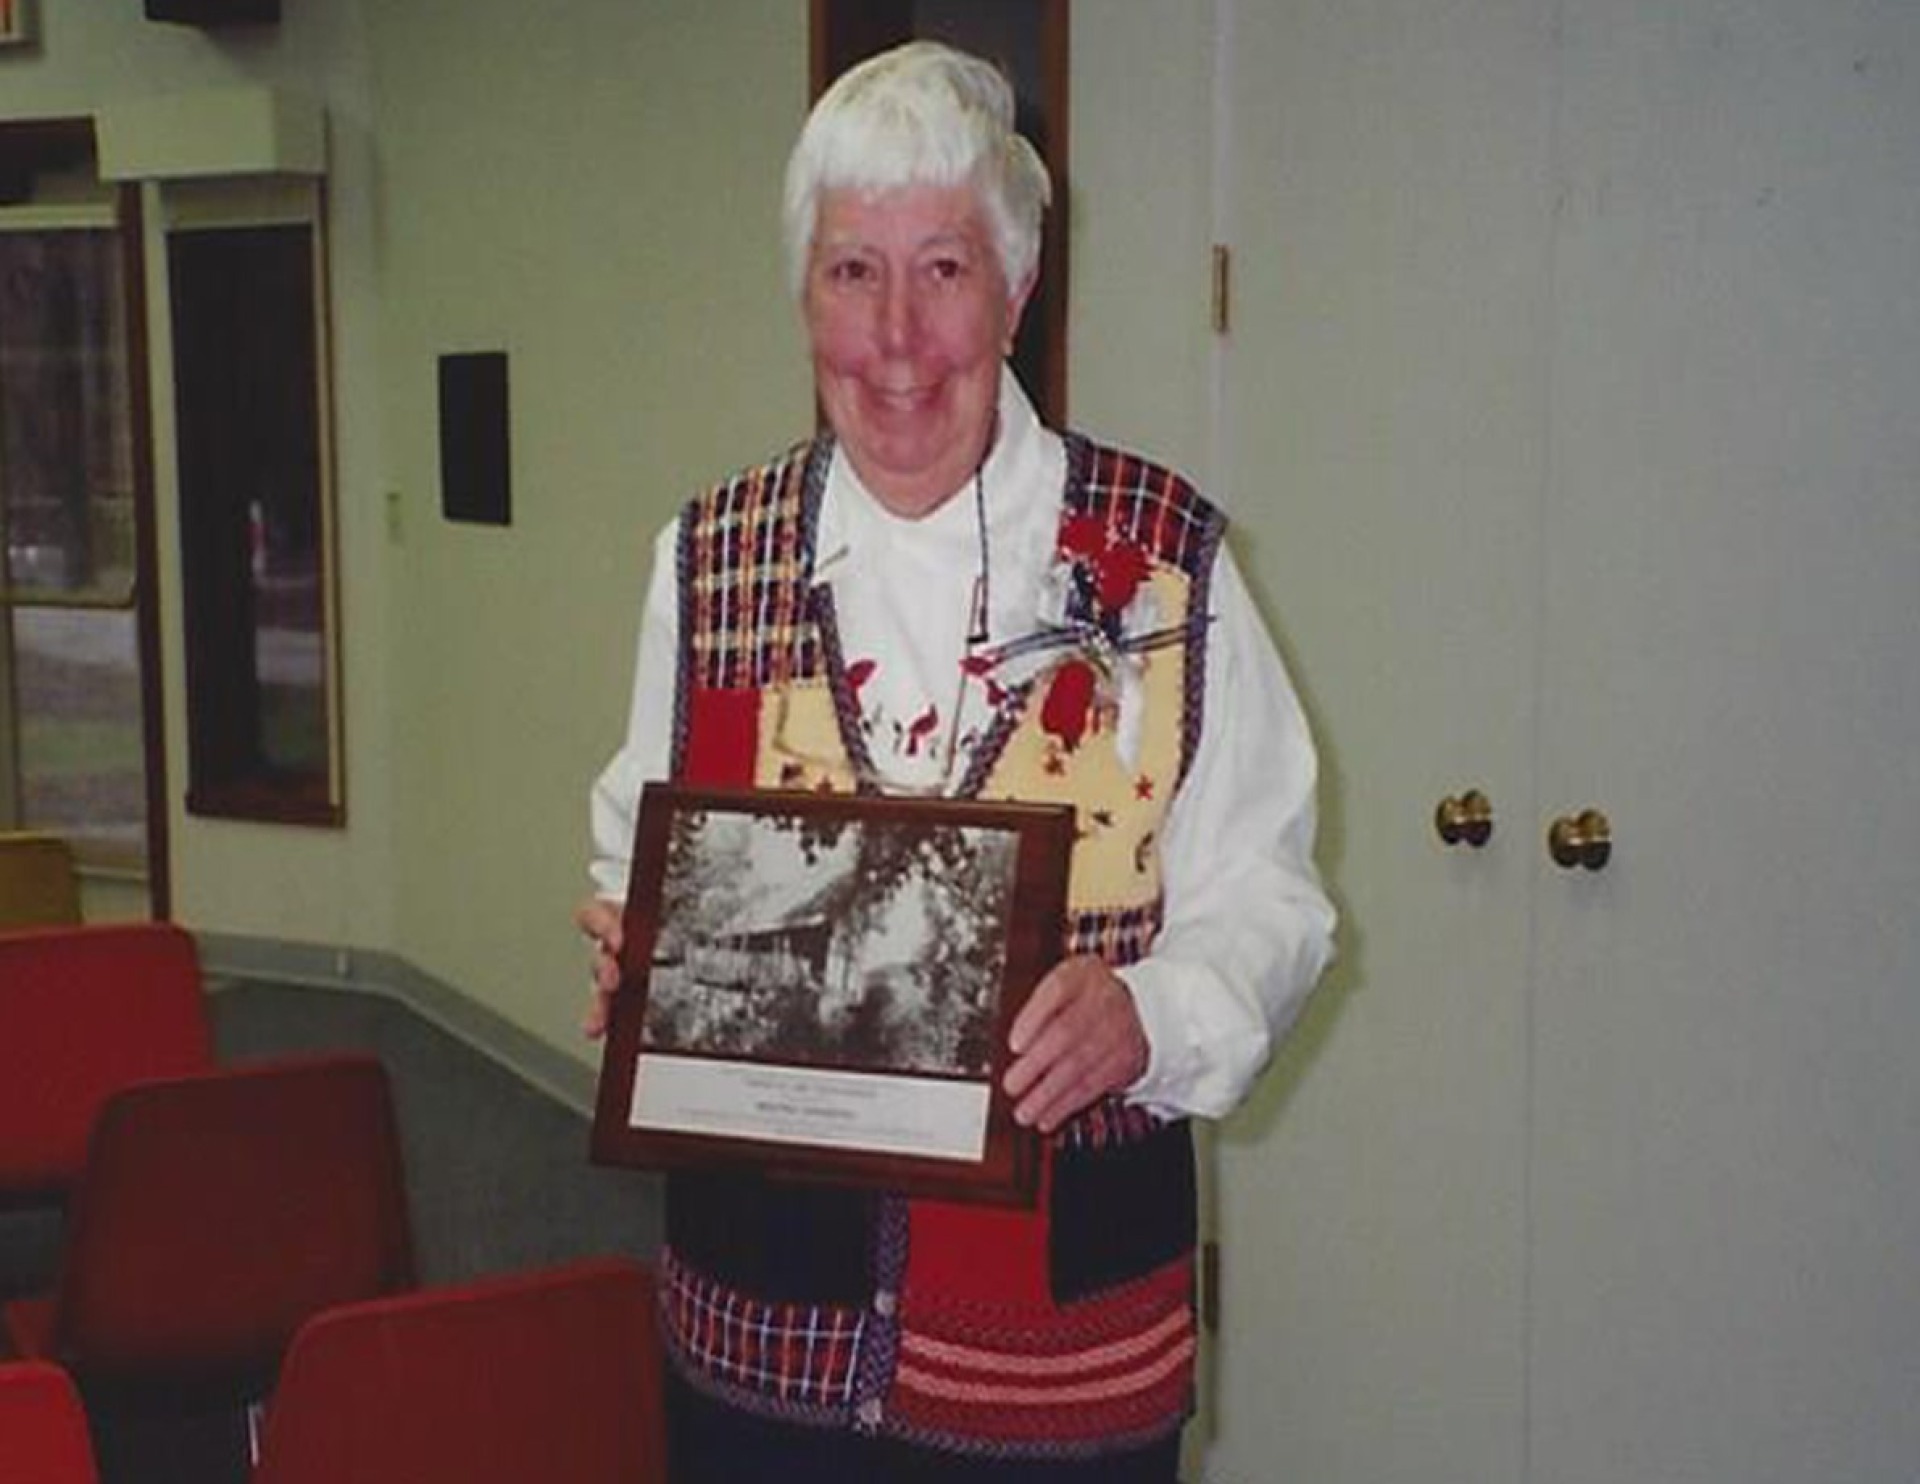 Maxine Sanberg proudly displaying a plaque.